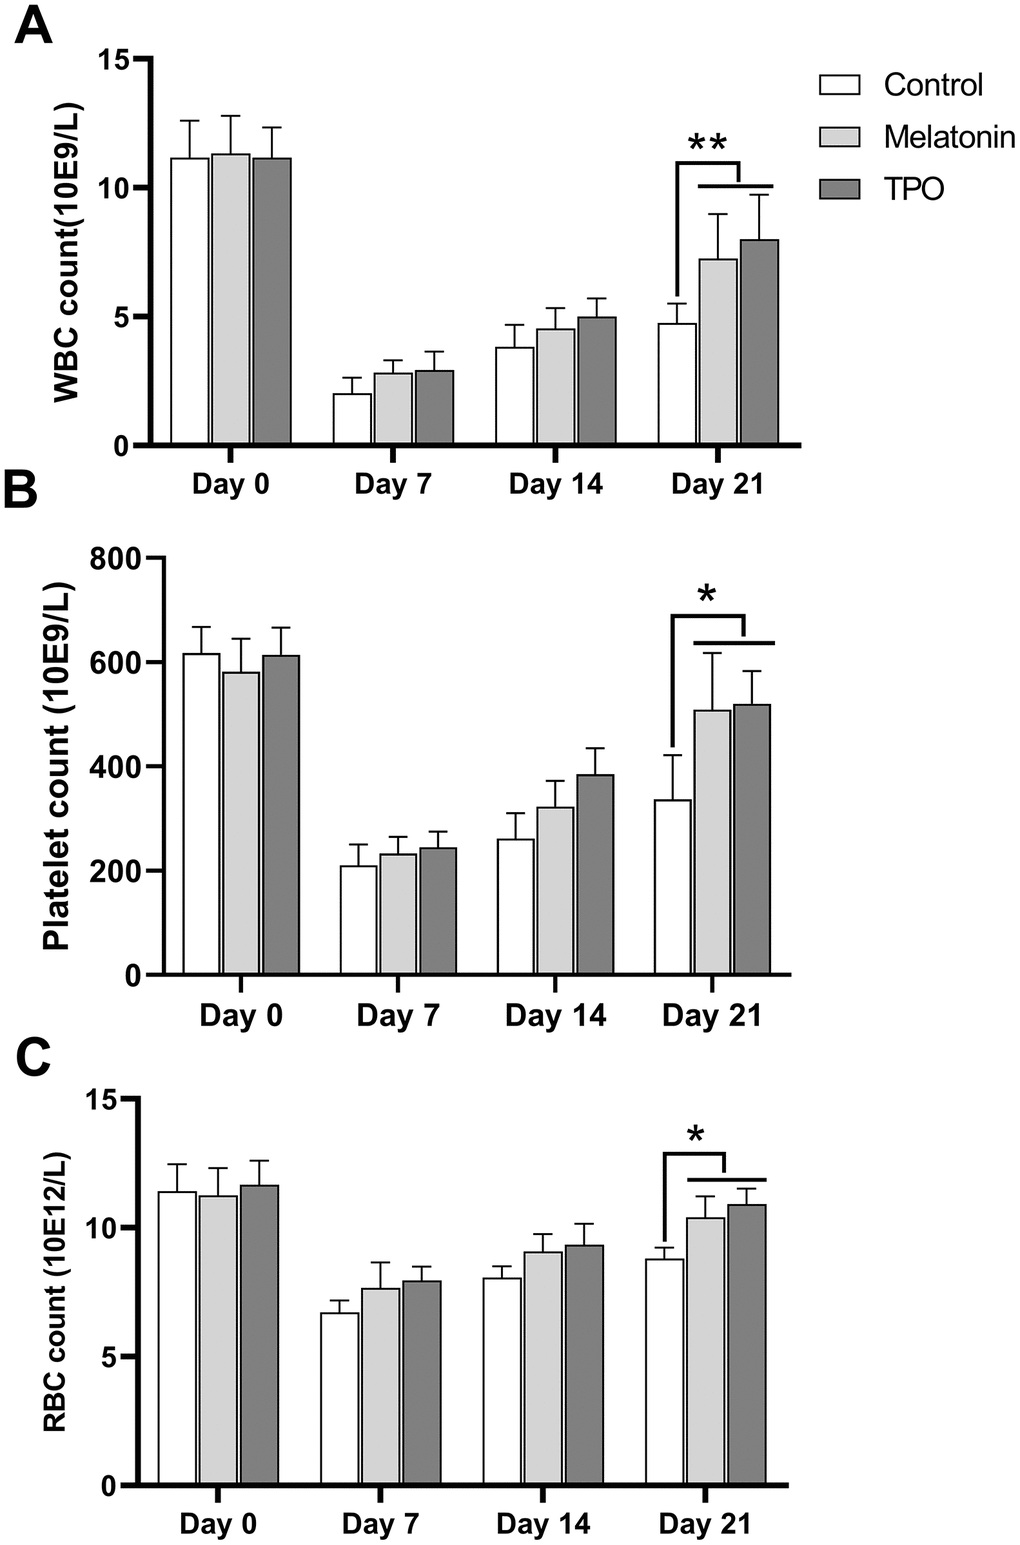 Melatonin increases peripheral blood cell counts in the radiation-induced myelosuppression mouse. Mice were treated with melatonin (10 mg/kg/day) or TPO (positive control, 1 μg/kg/day) by injecting intraperitoneally. The injections were performed once a day starting from the day of irradiation. (A) white blood cells count. (B) Platelets count. (C) red blood cells count. The effect of melatonin was similar to TPO. Two-way ANOVA (with a Tukey multiple comparison test) was employed to test for significance. * p